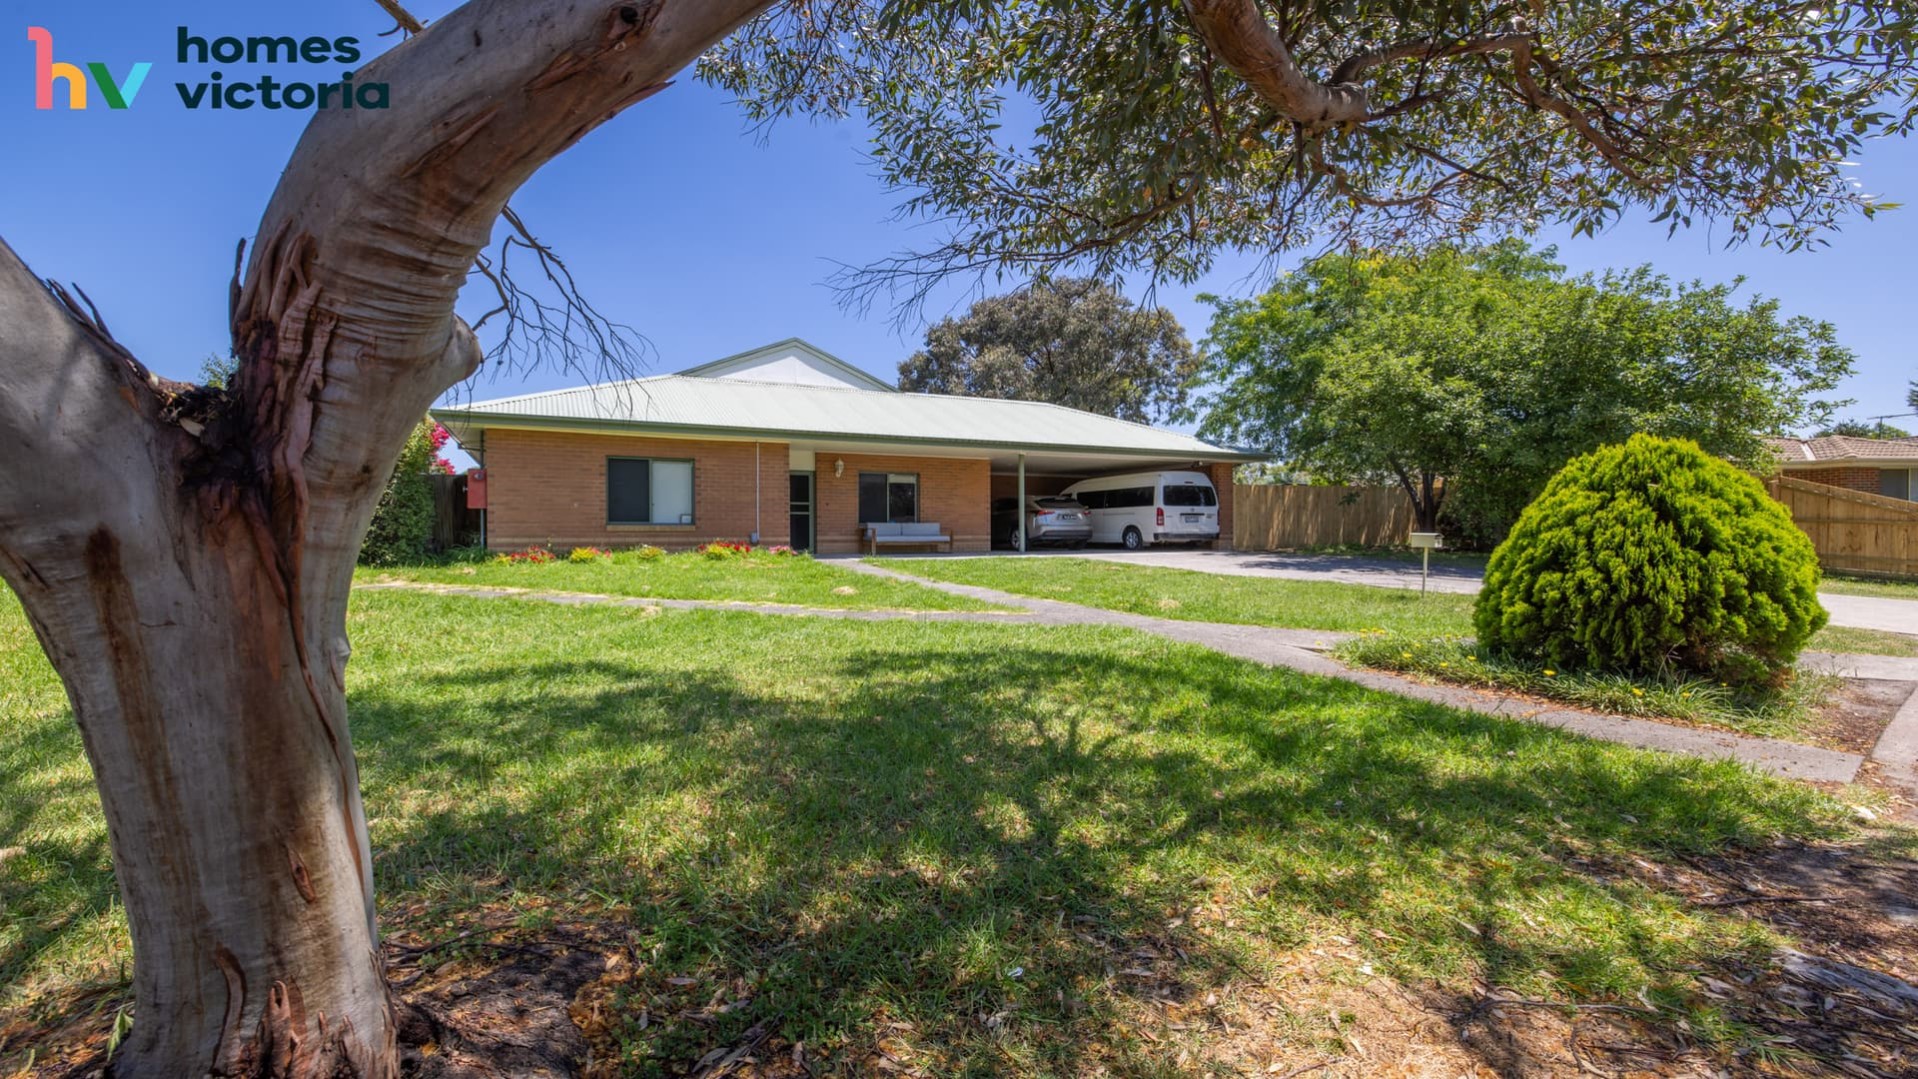 single level brick house set back on the block with long entry and spacious lawned area.